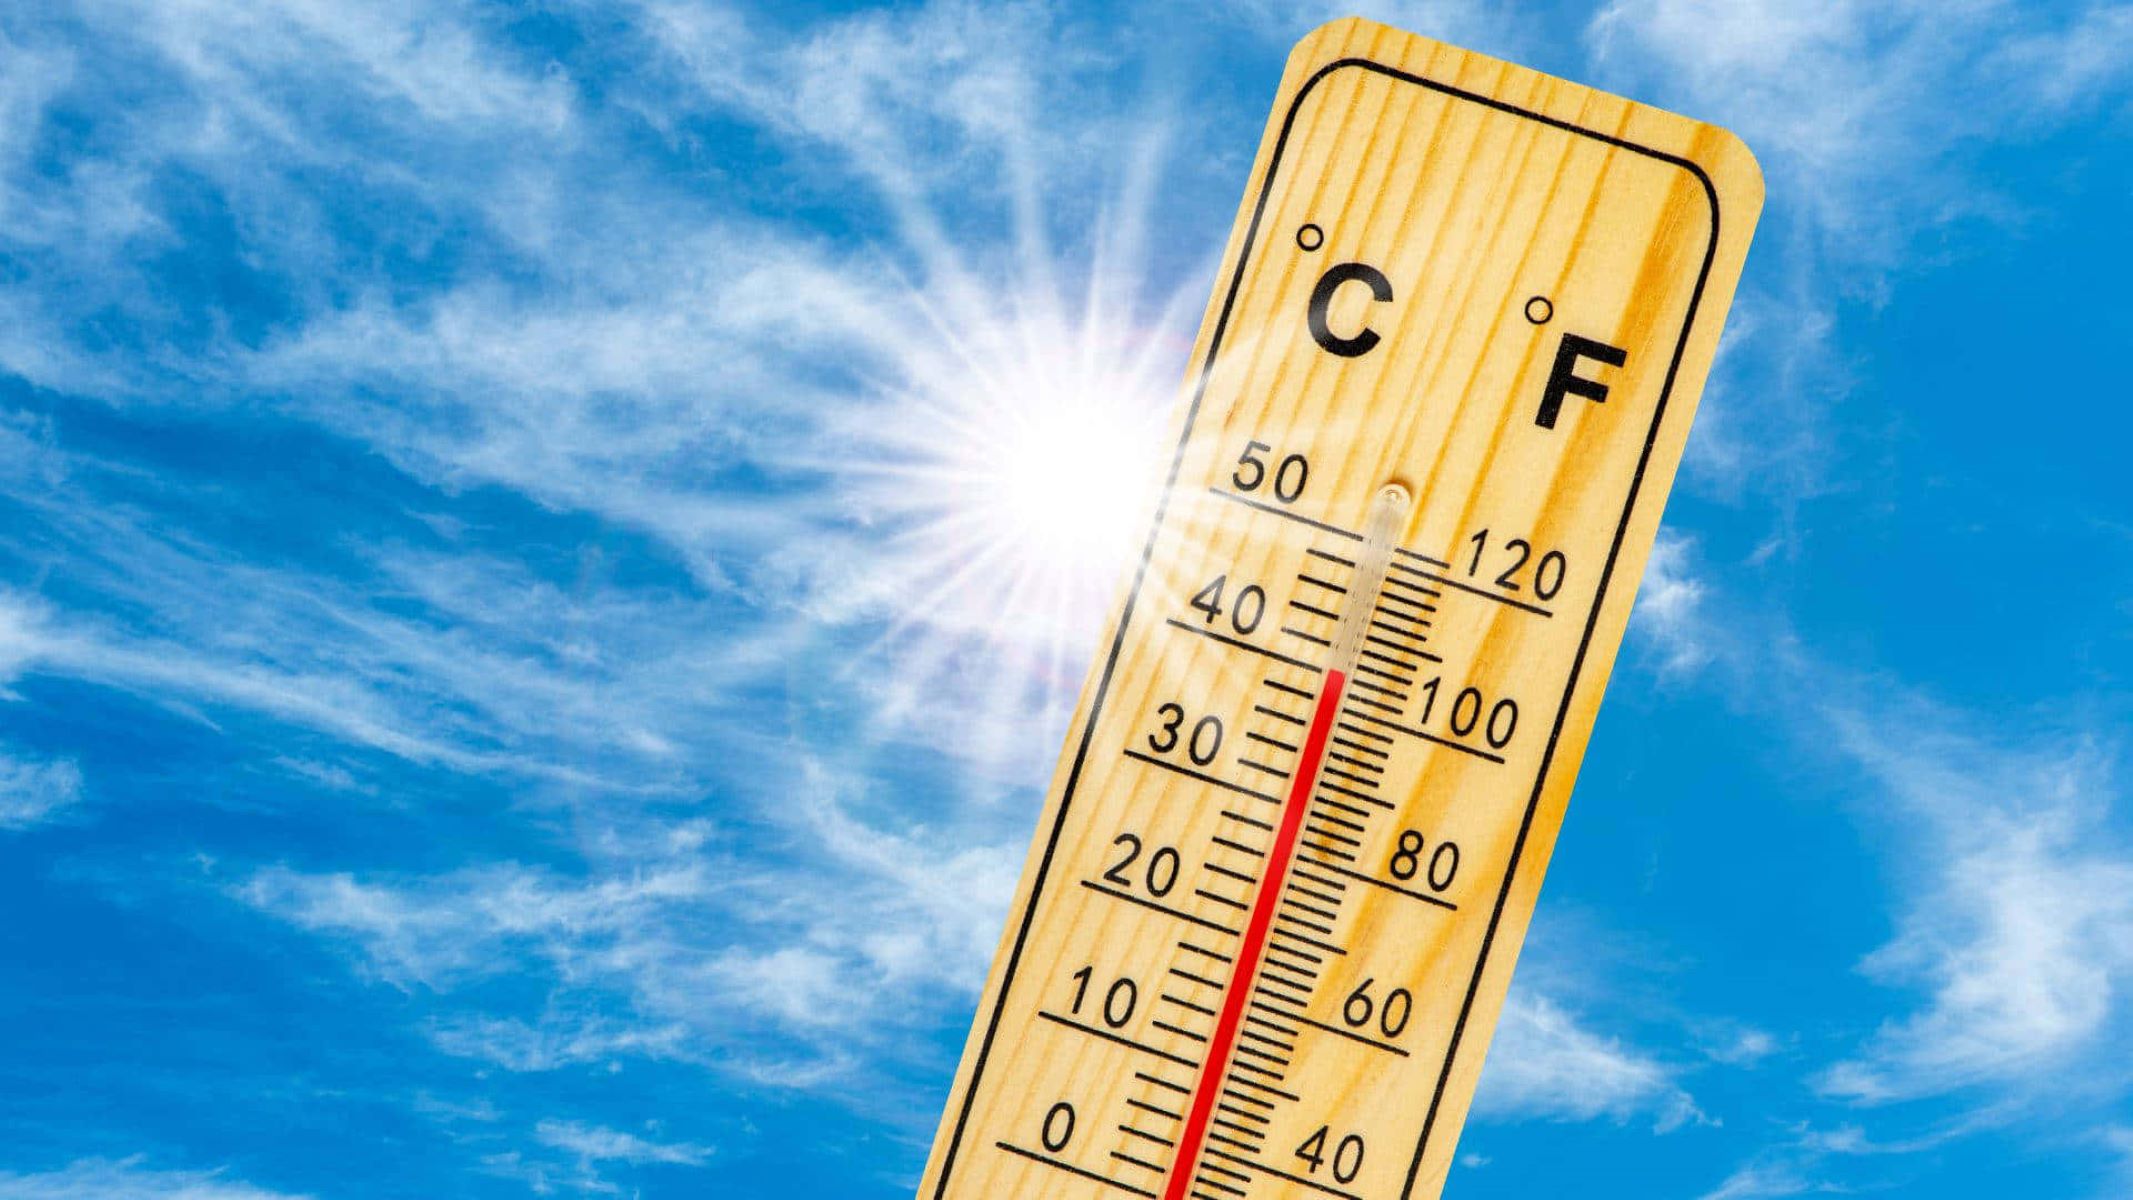 Mind-Blowing Conversion: Discover The Celsius Equivalent Of 99 Degrees Fahrenheit!